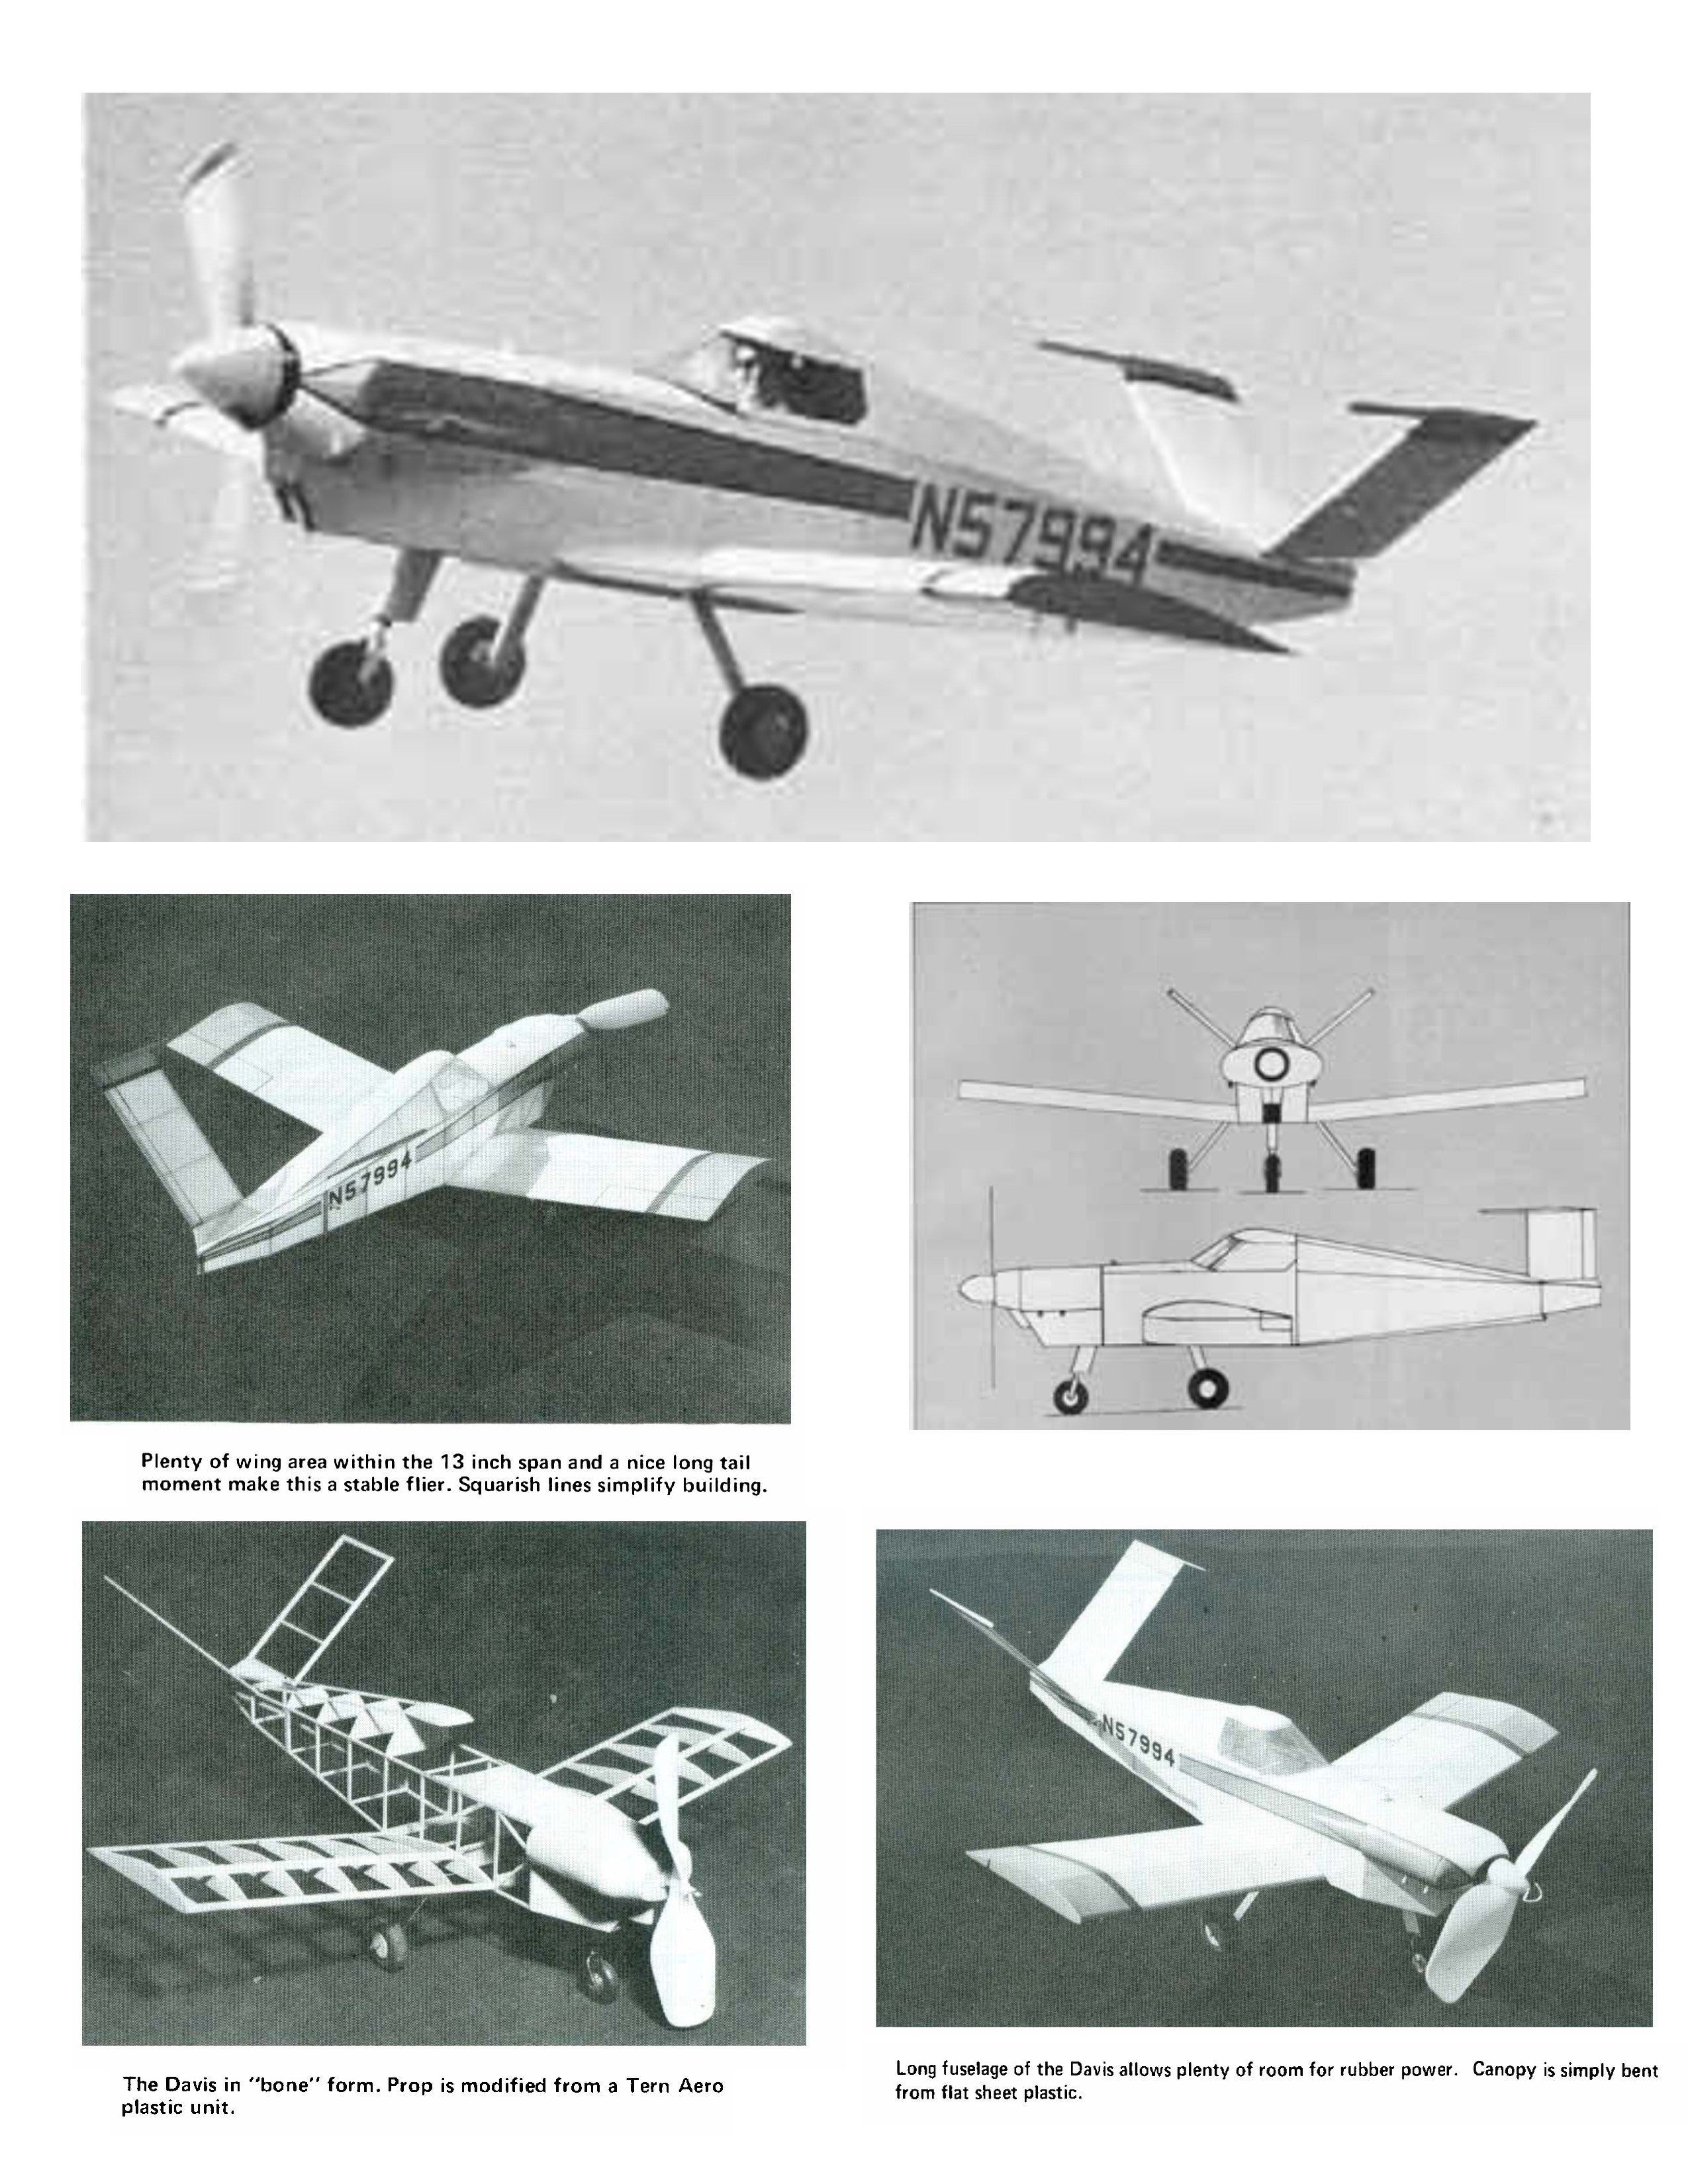 full size printed peanut scale plans davis da-5a t's above average in the flying